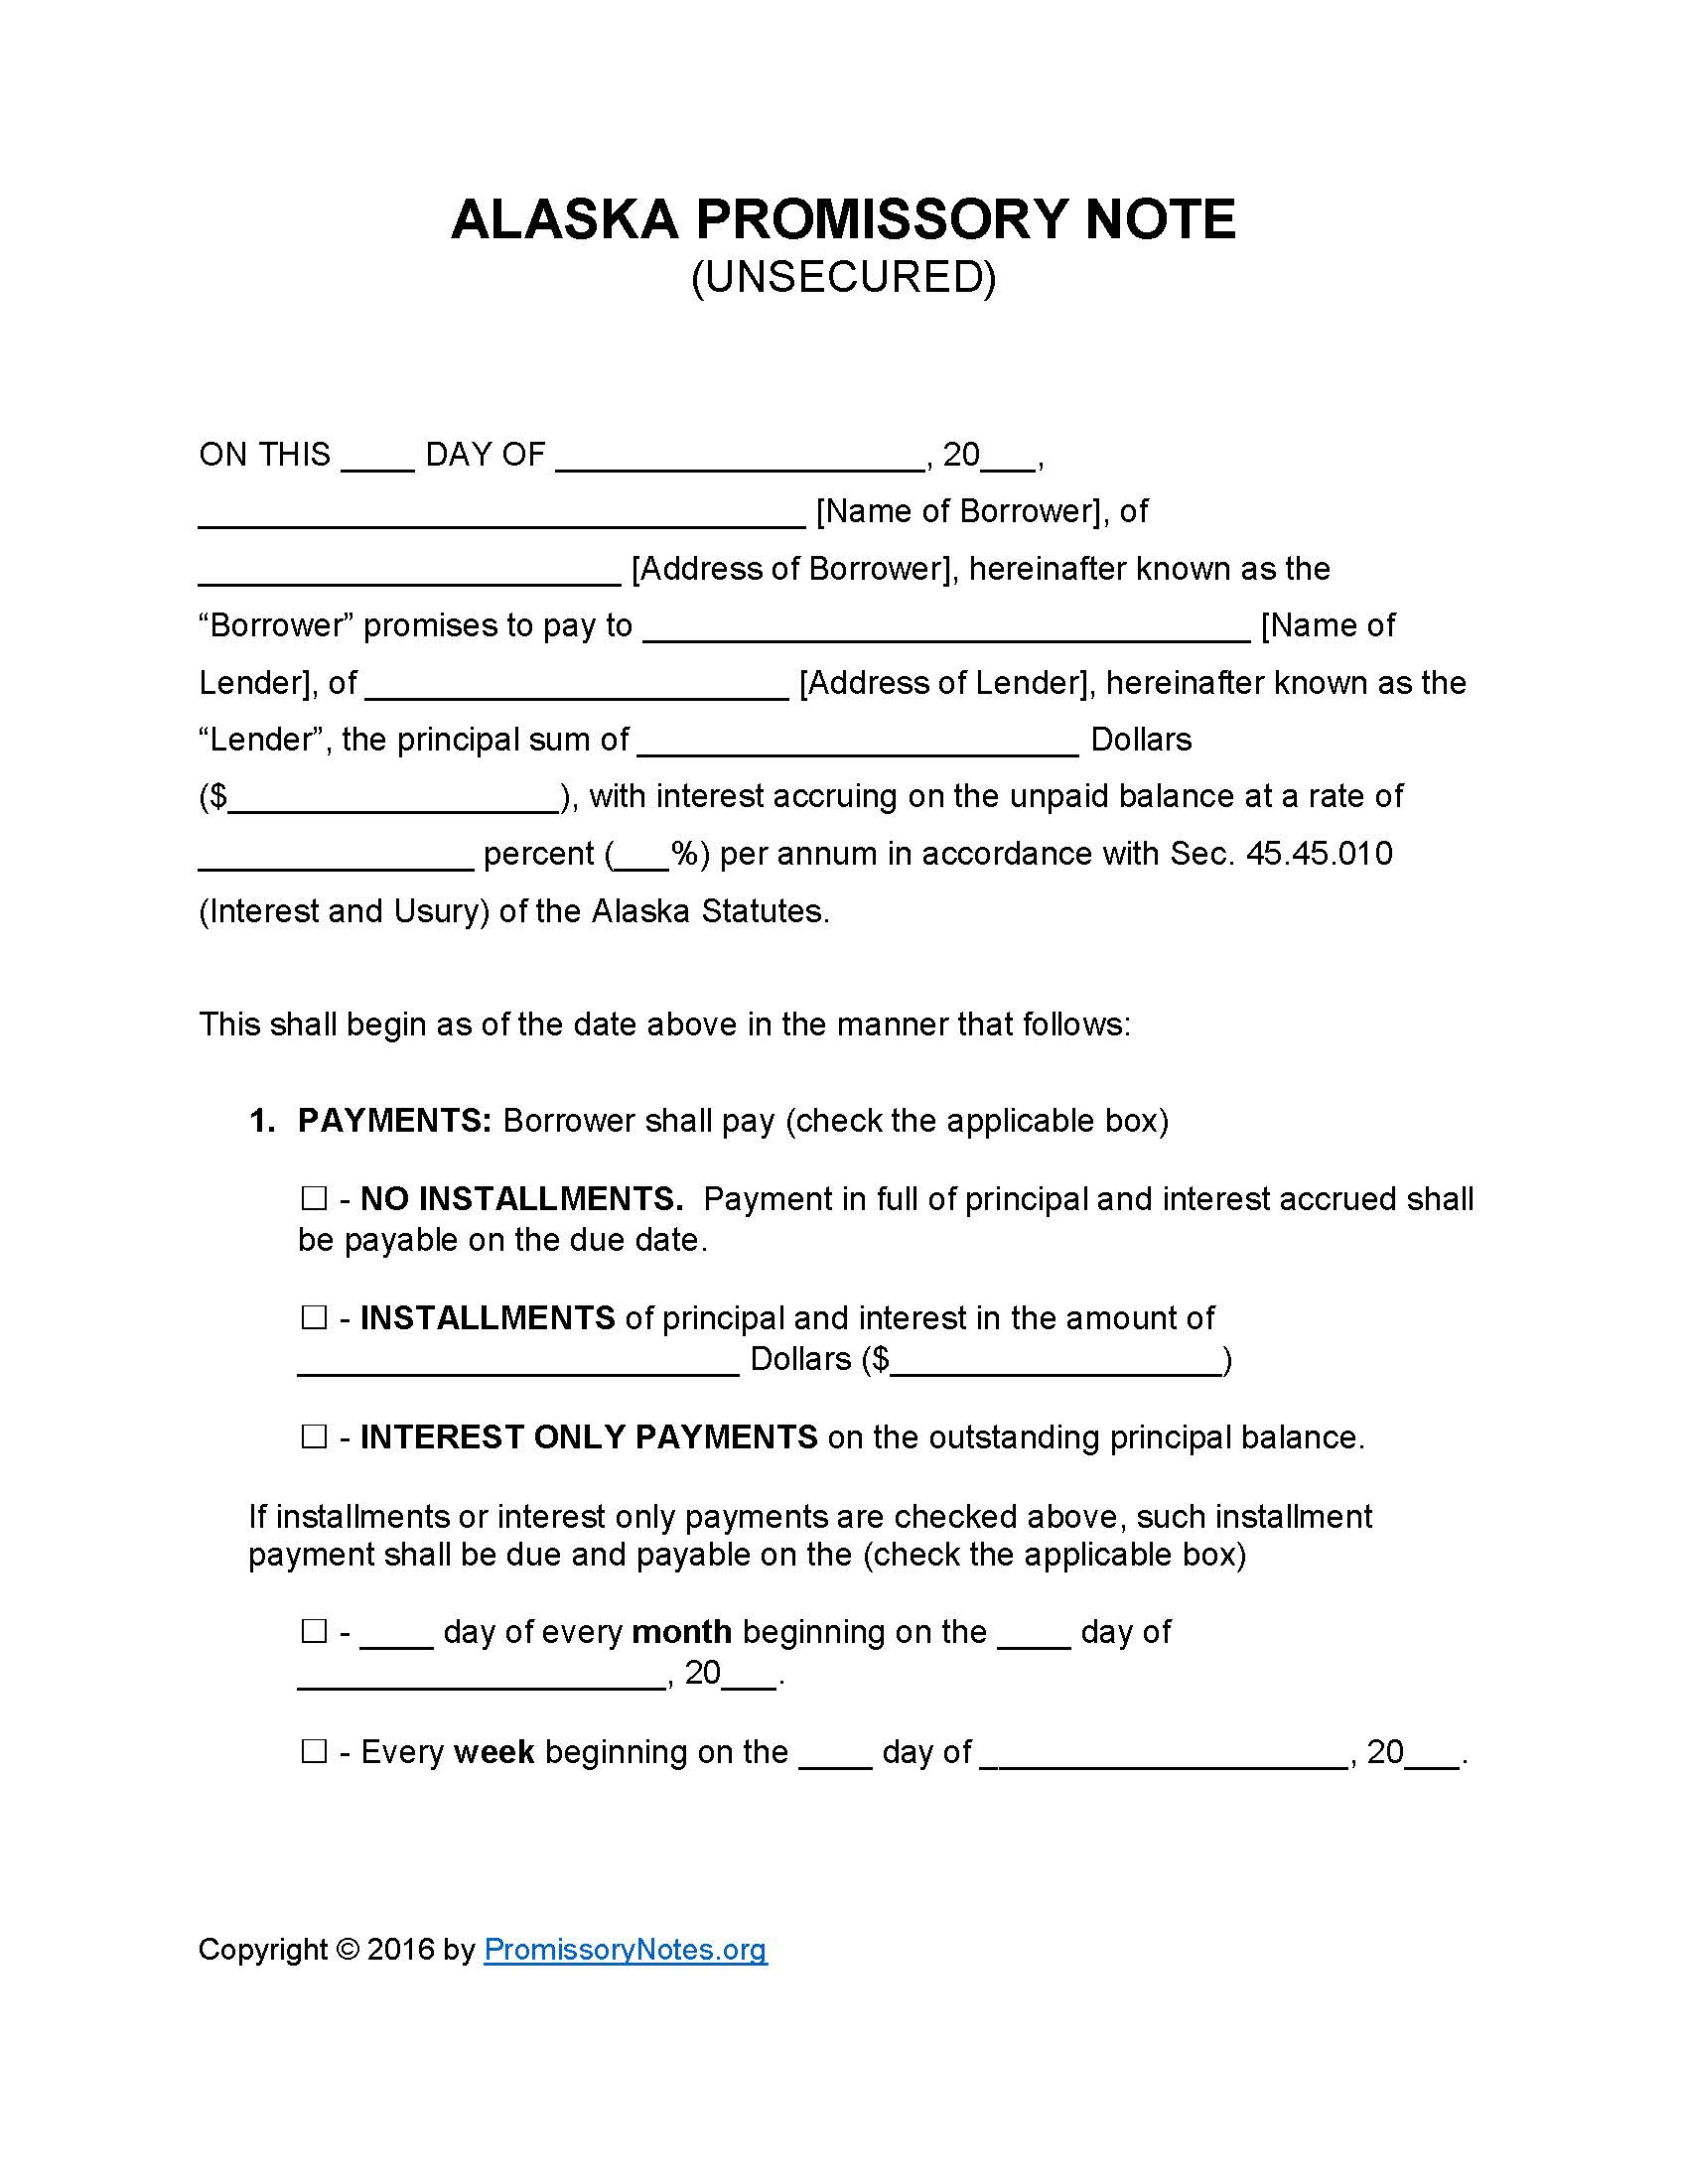 alaska-unsecured-promissory-note-form